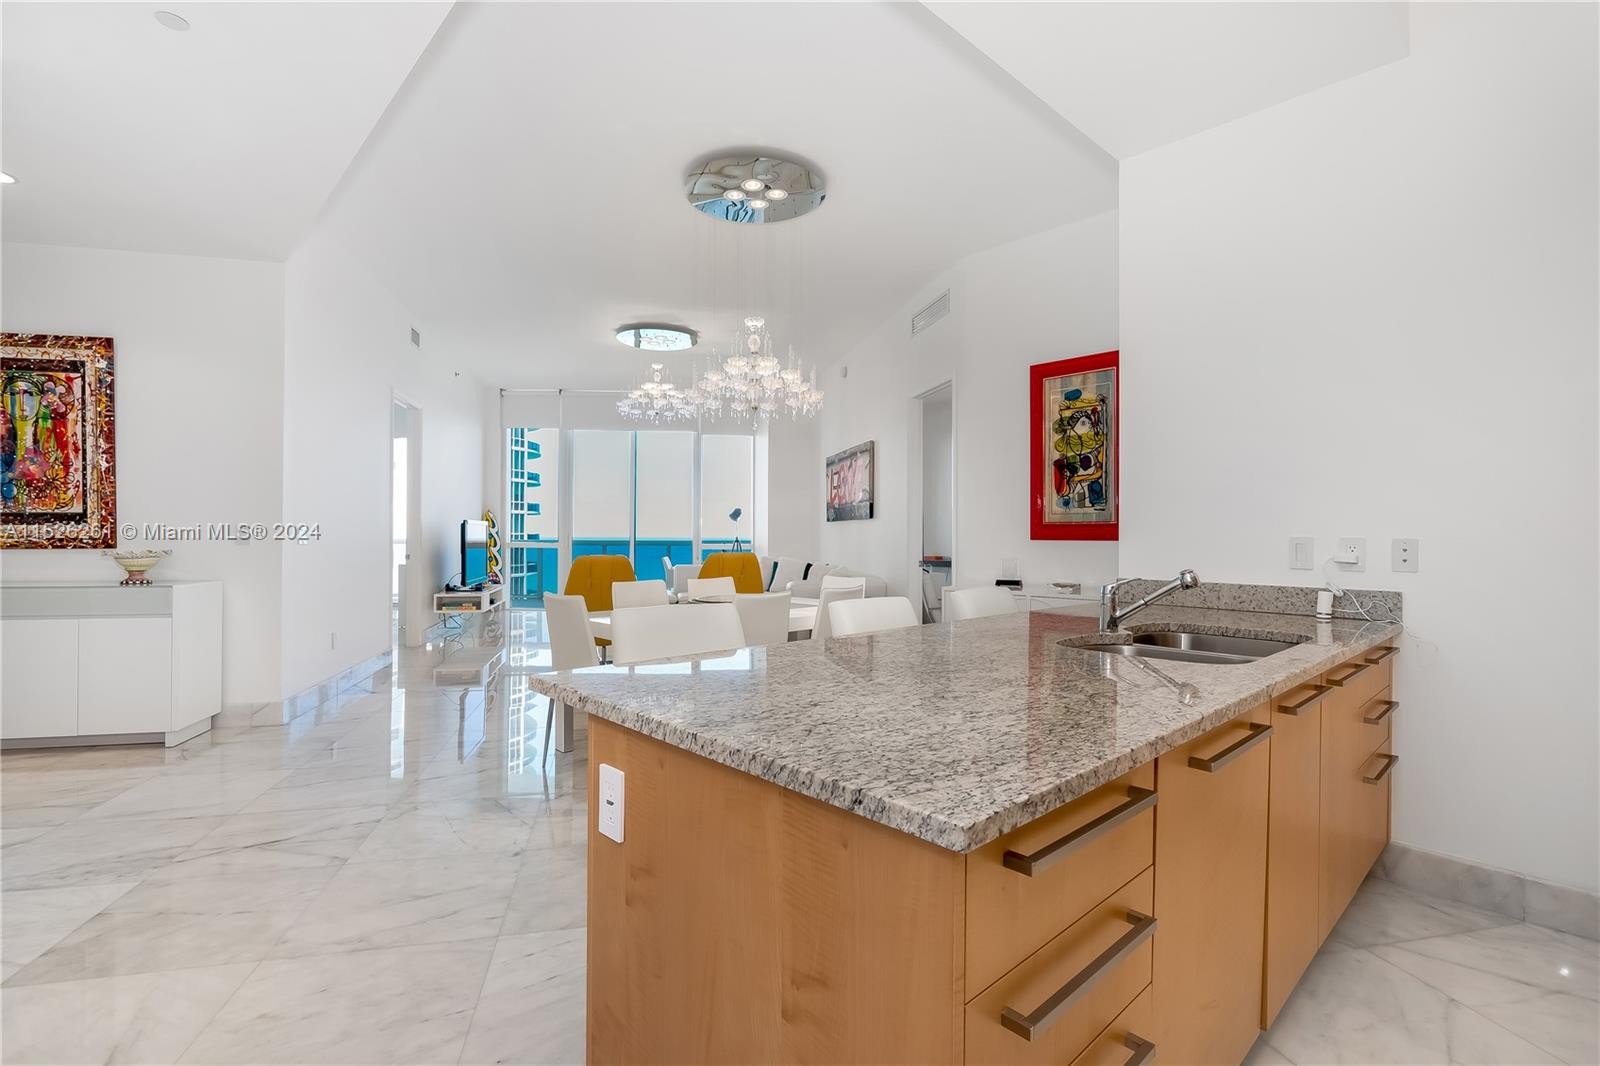 17. 15901 Collins Ave (Avail 5/1-11/15)